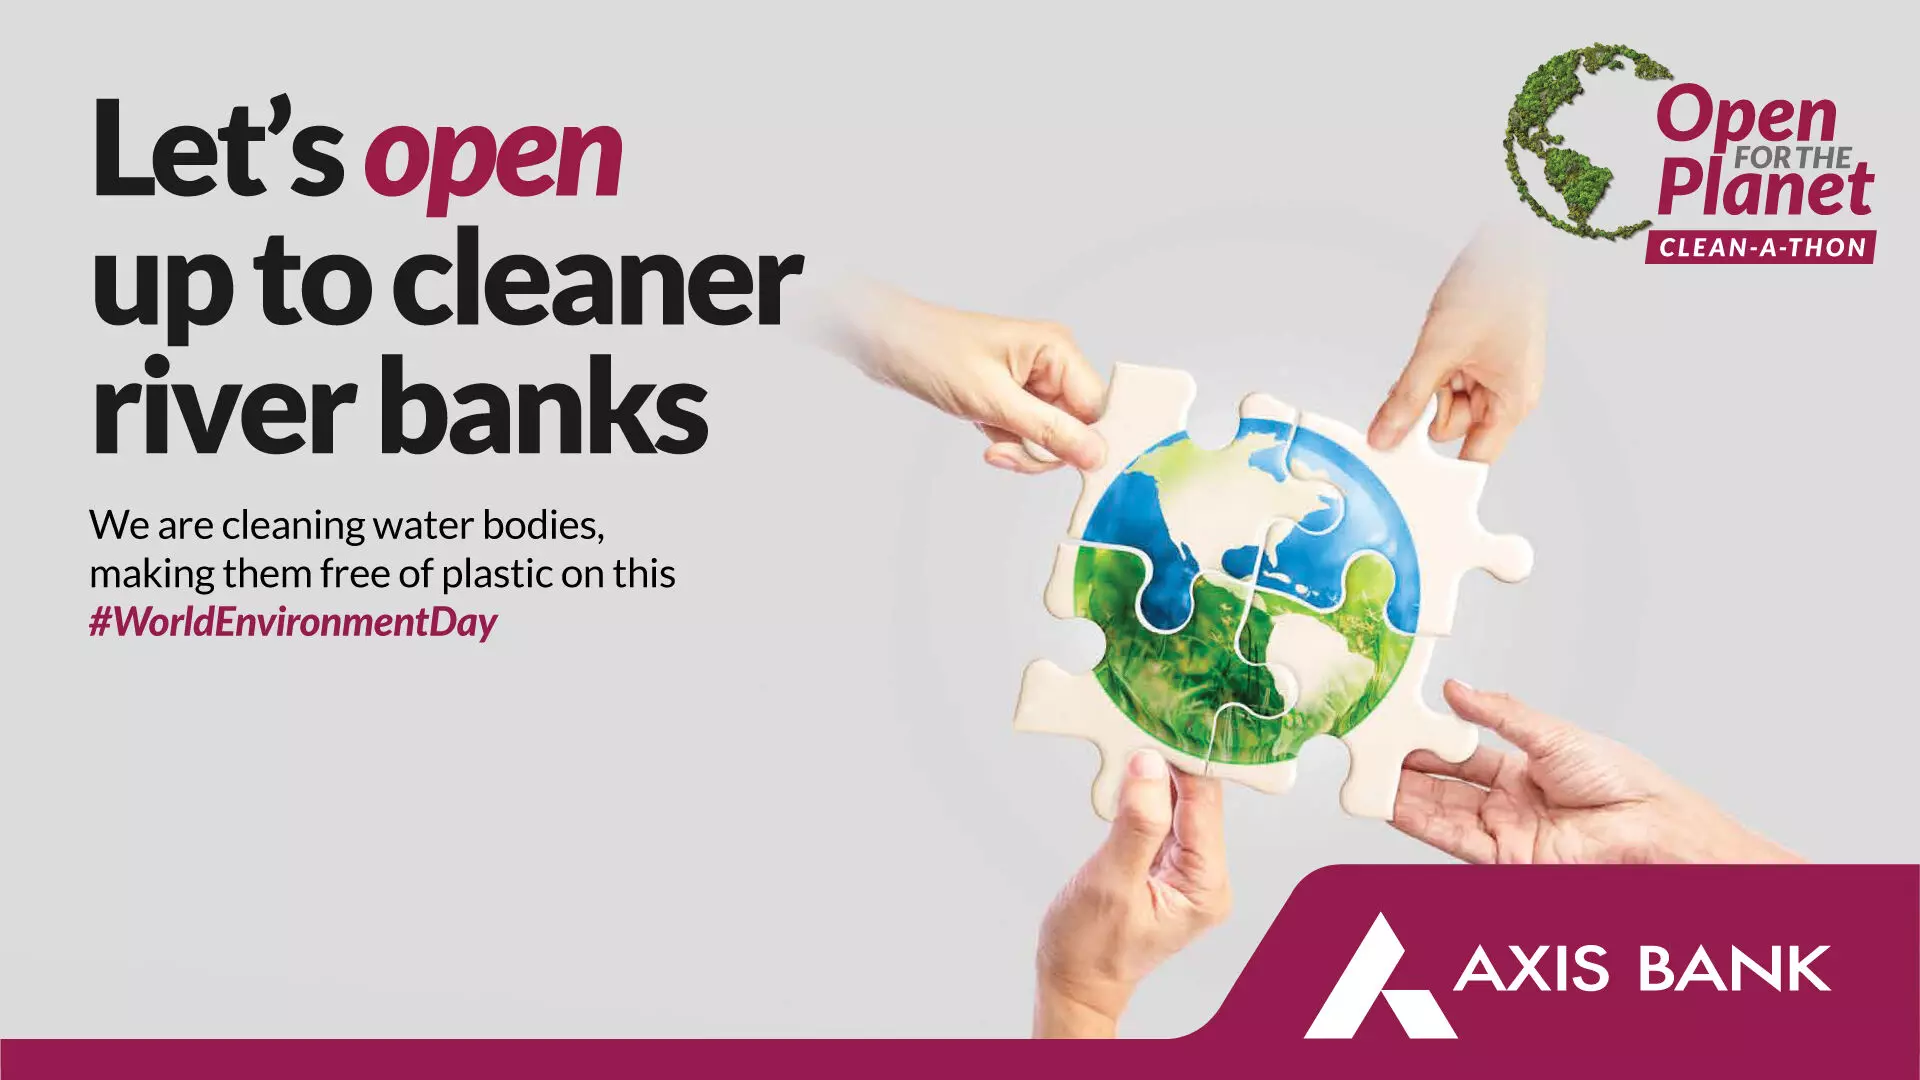 Axis Bank enters Asia Book of Record for its environment stewardship